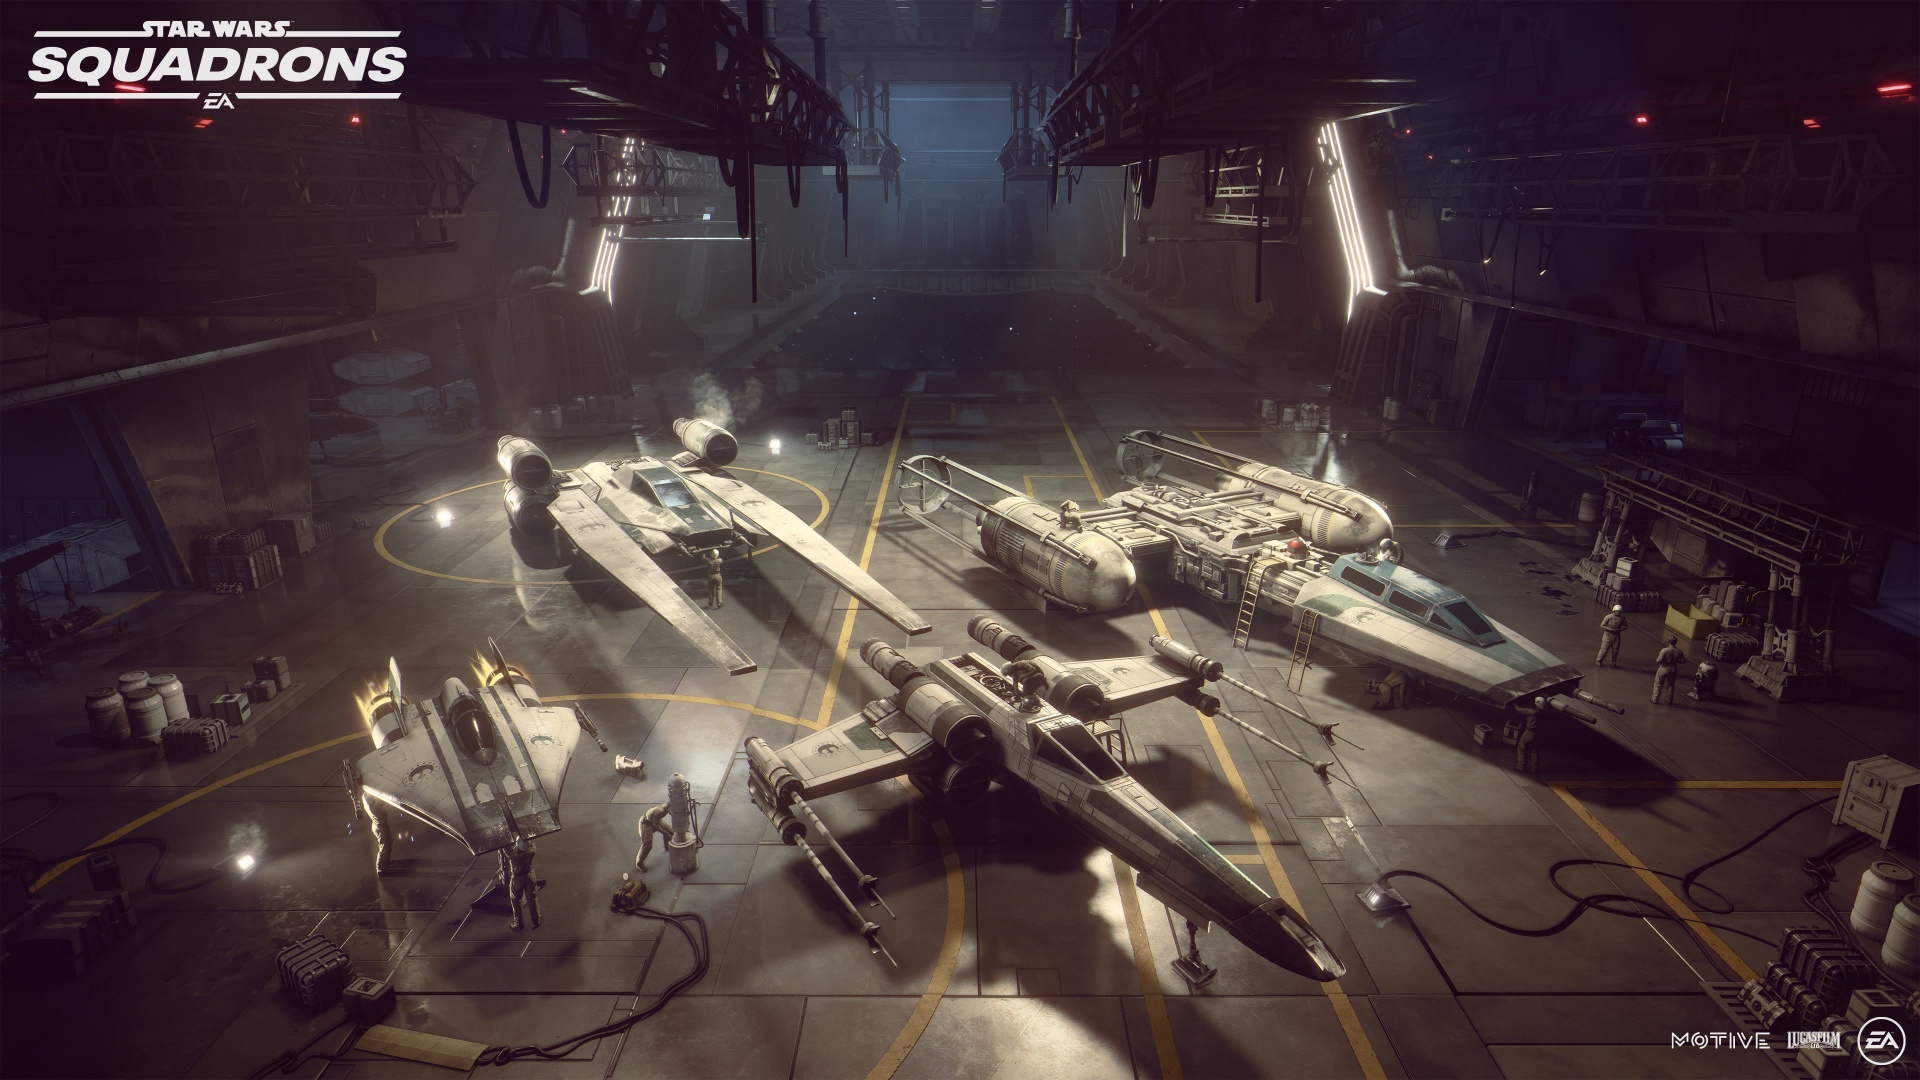 star-wars-squadrons-hanger-pc-games-playstation-4-xbox-one-1920x1080-1876.jpg